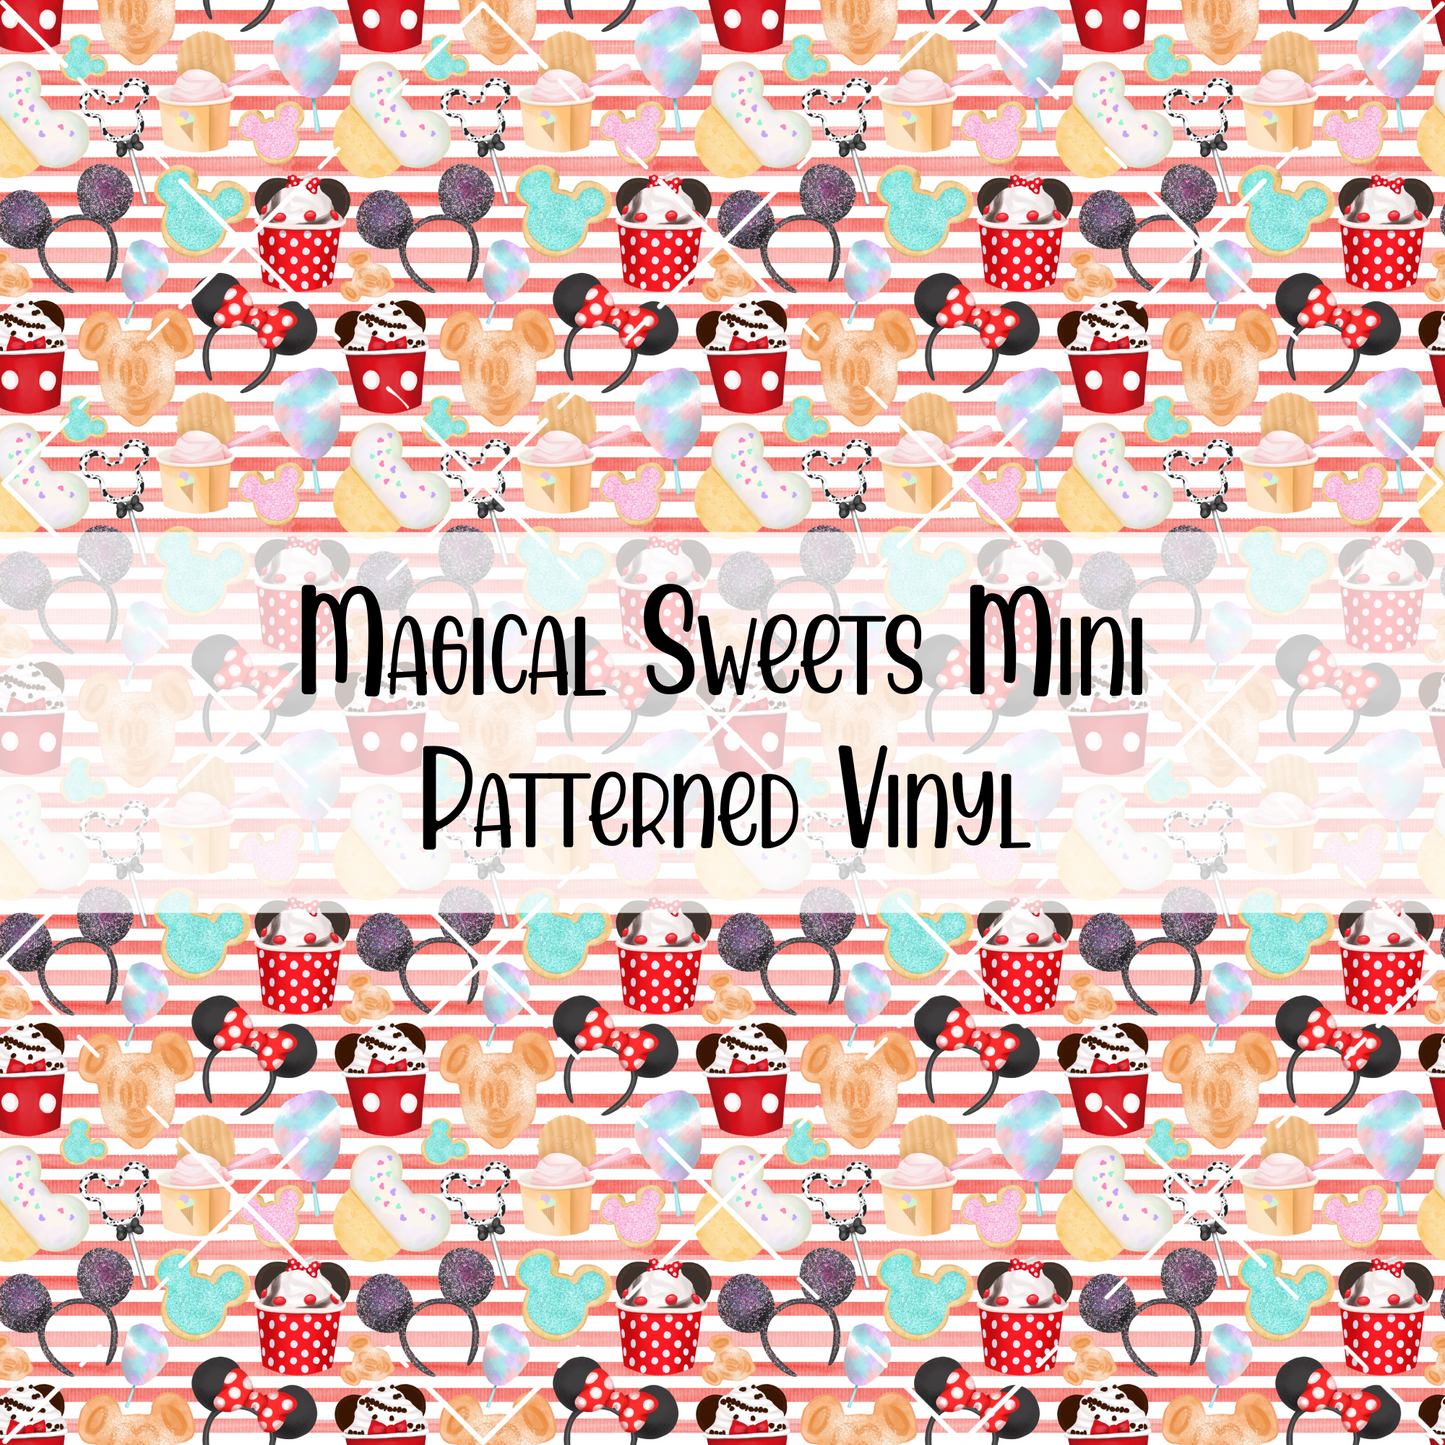 Magical Sweets Patterned Vinyl